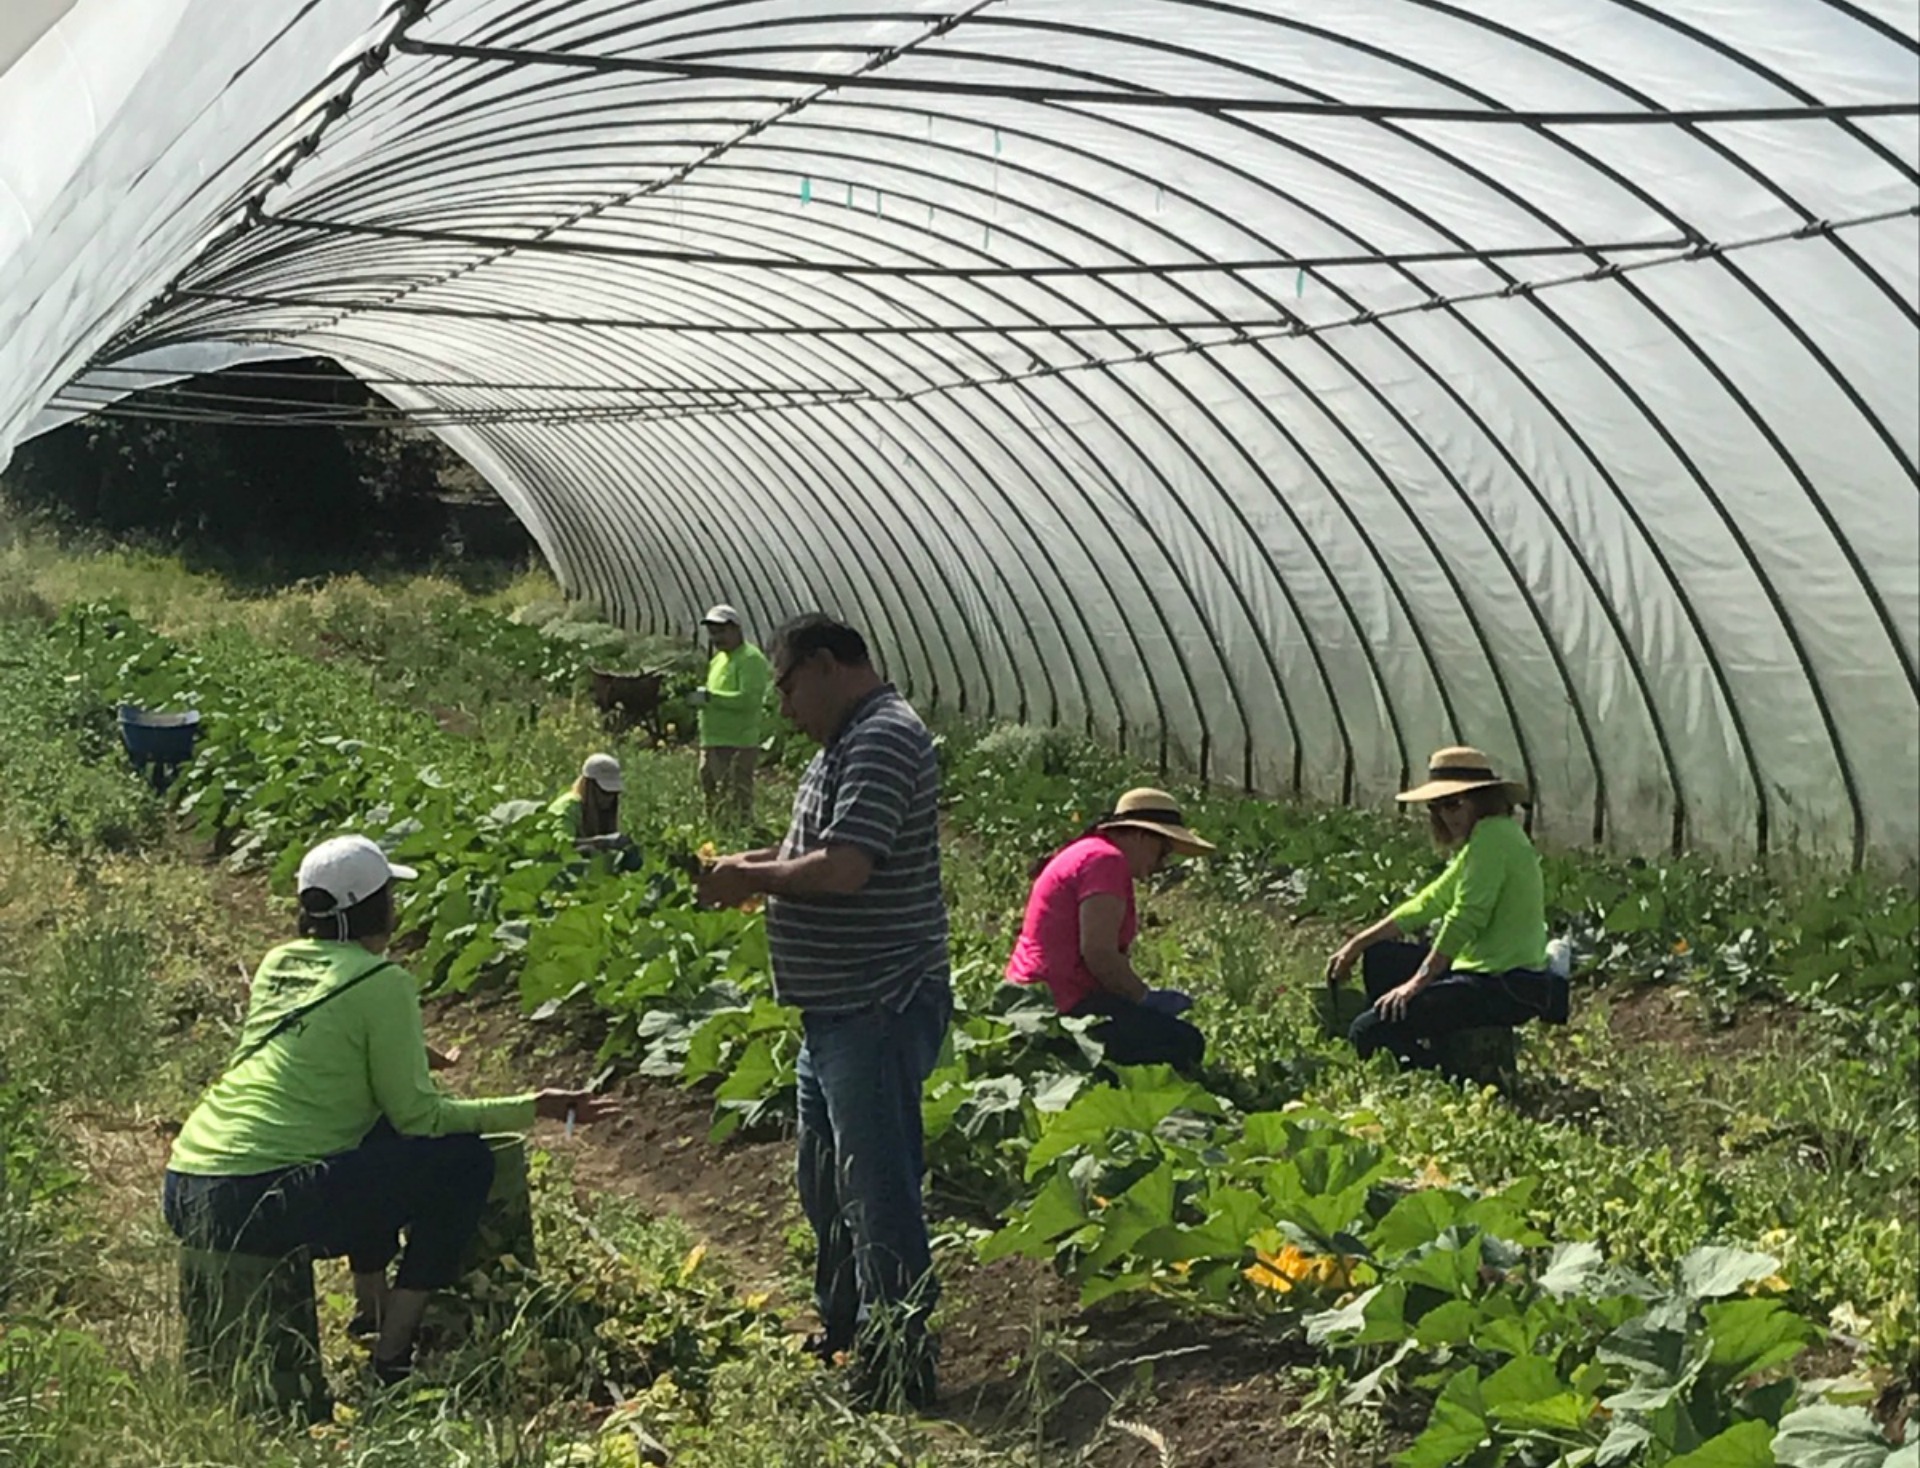 Farm To Pantry volunteers glean excess produce from farms to donate to charities.